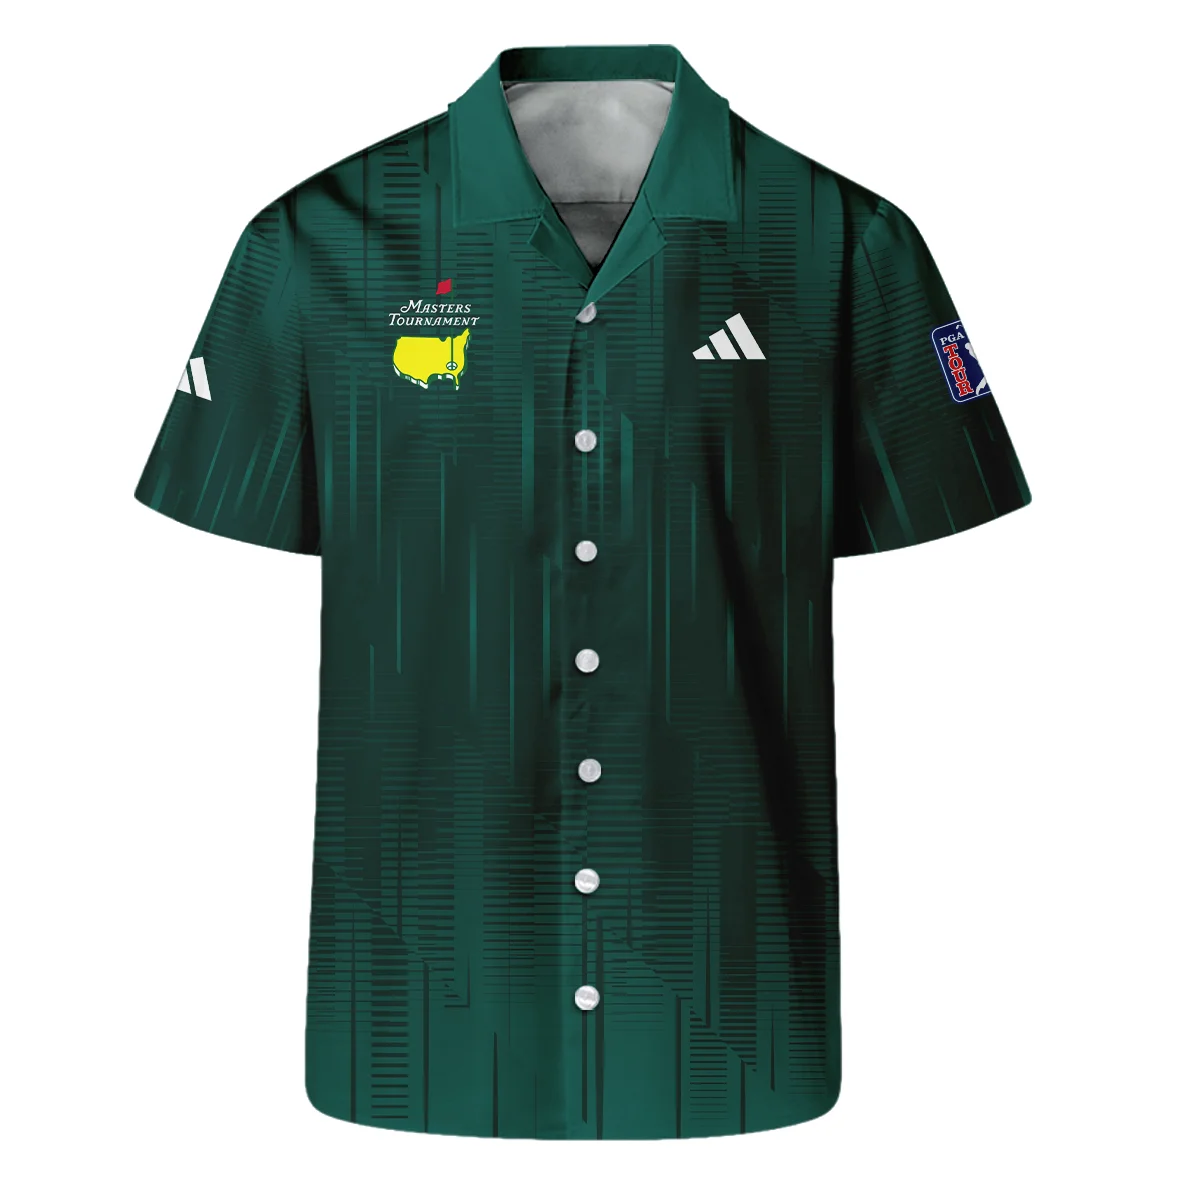 Masters Tournament Adidas Dark Green Gradient Stripes Pattern Vneck Long Polo Shirt Style Classic Long Polo Shirt For Men